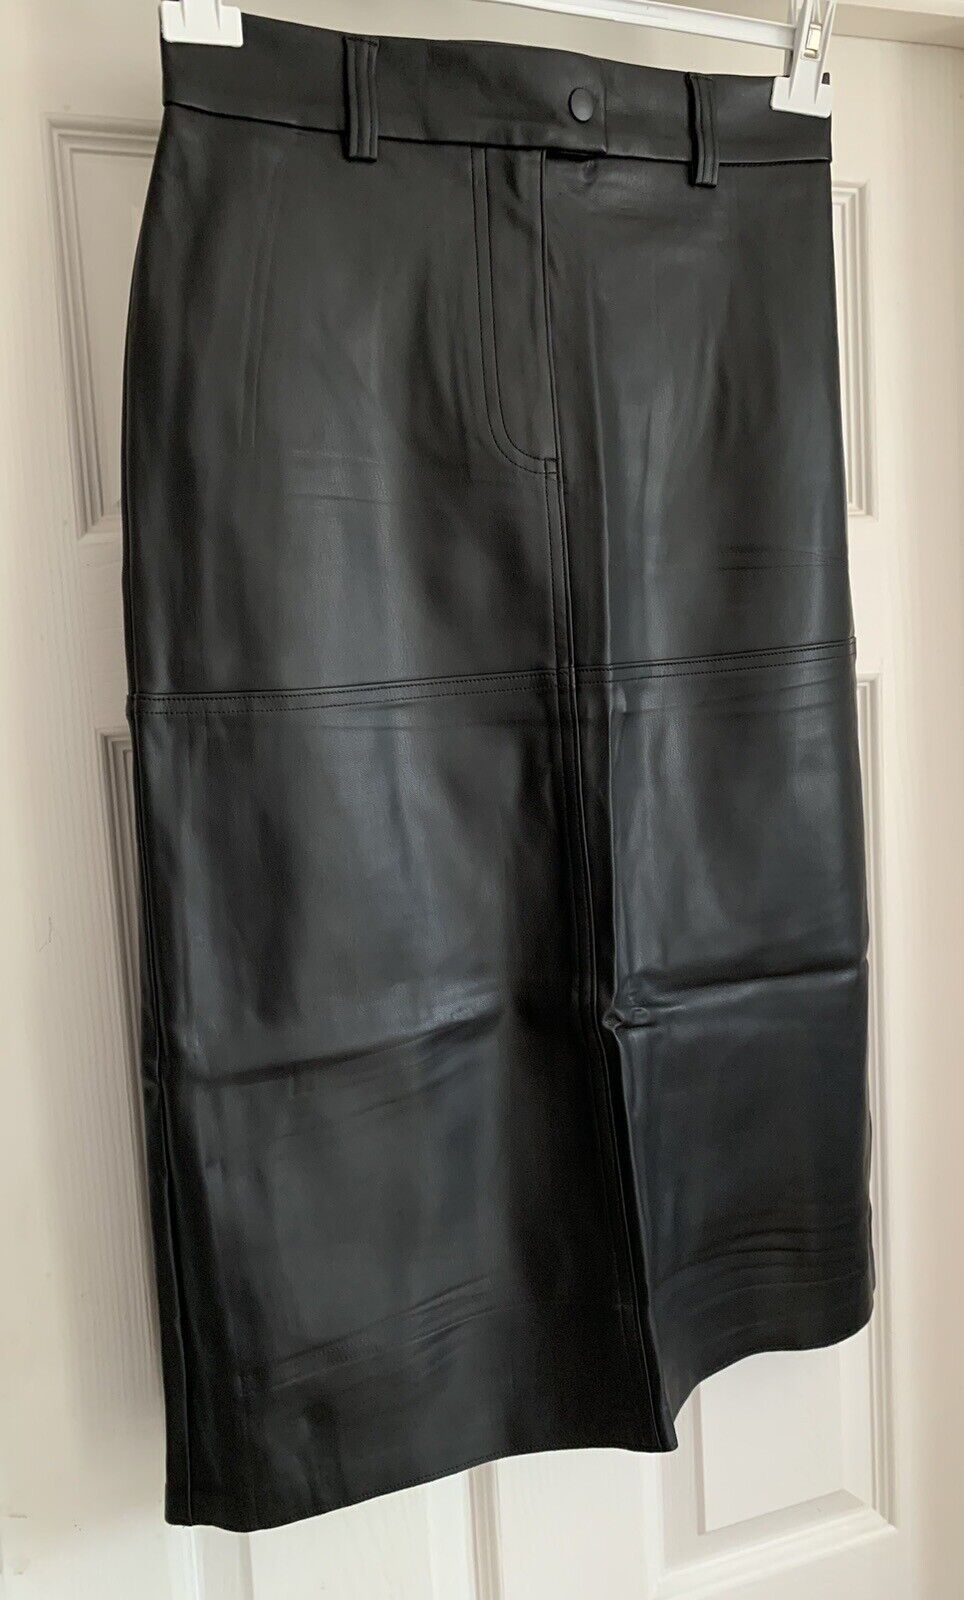 EX M*S Black Unlined Faux Leather A-Line Skirt Sizes 8 10 12 14 16 18 20 RRP £35